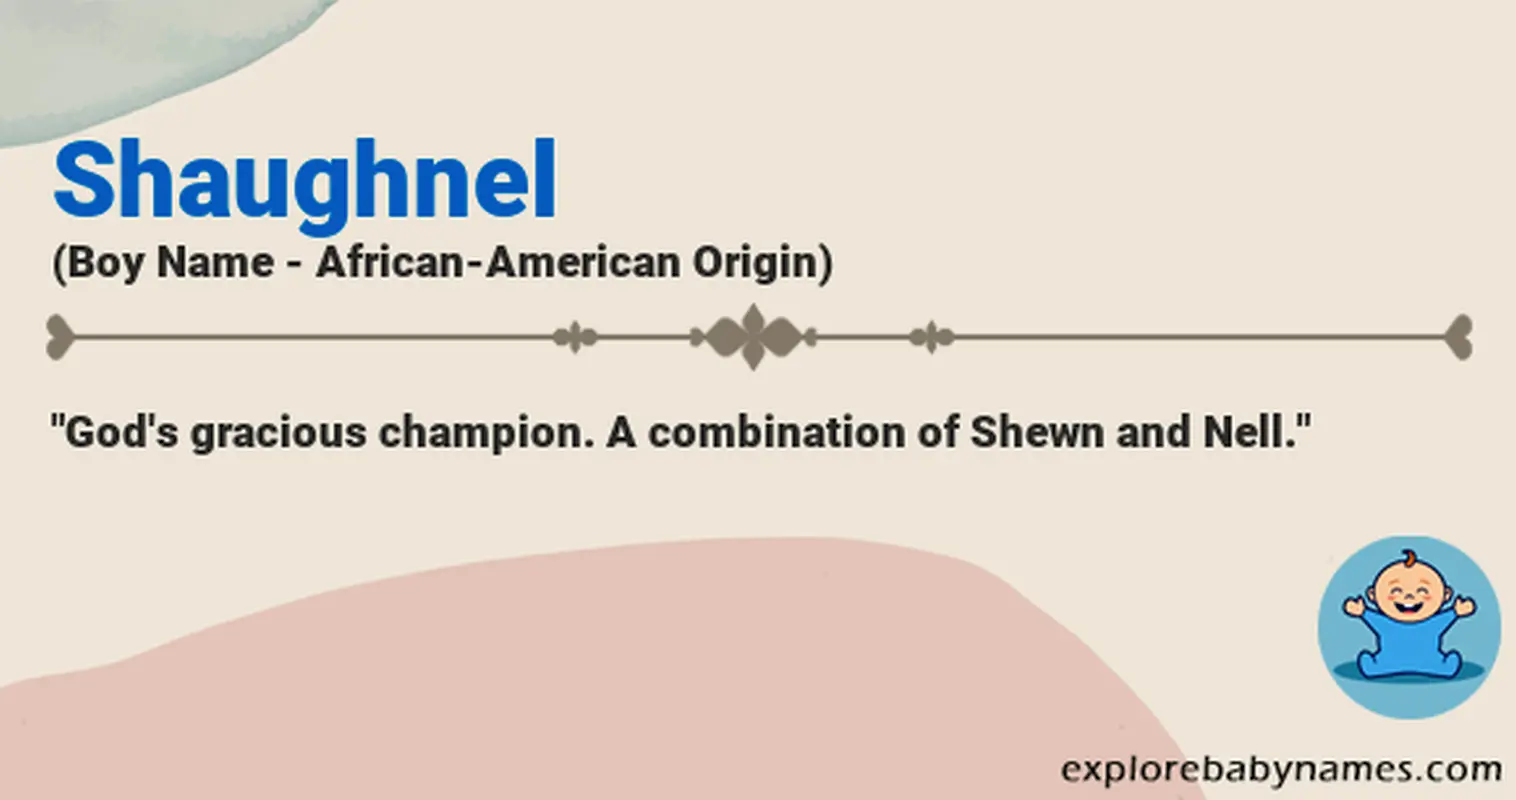 Meaning of Shaughnel